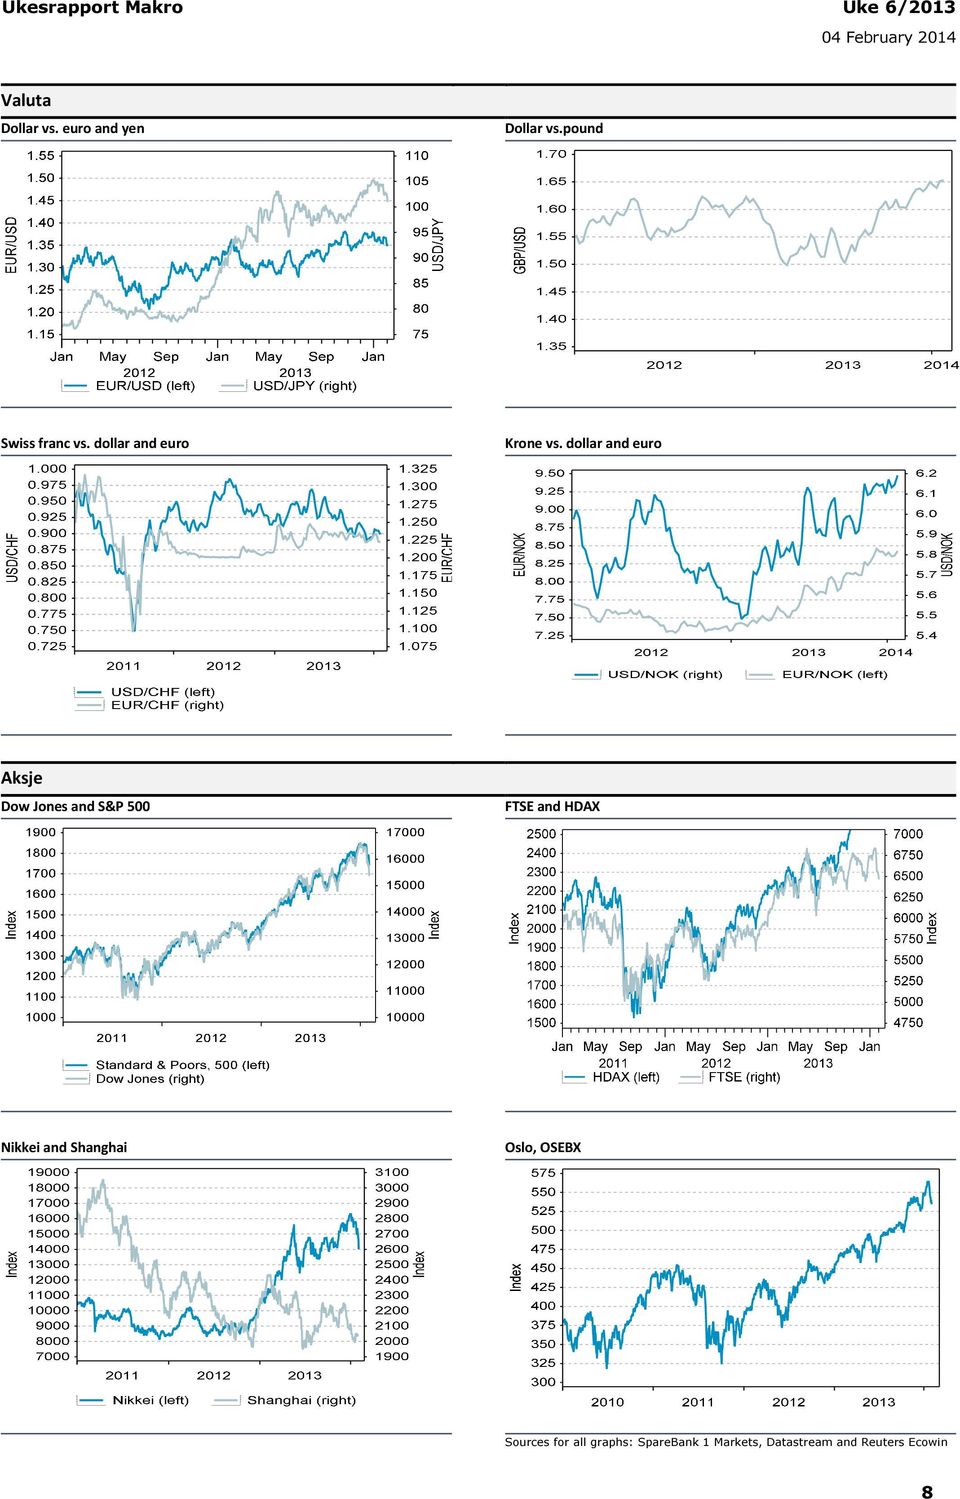 dollar and euro Aksje Dow Jones and S&P 500 FTSE and HDAX